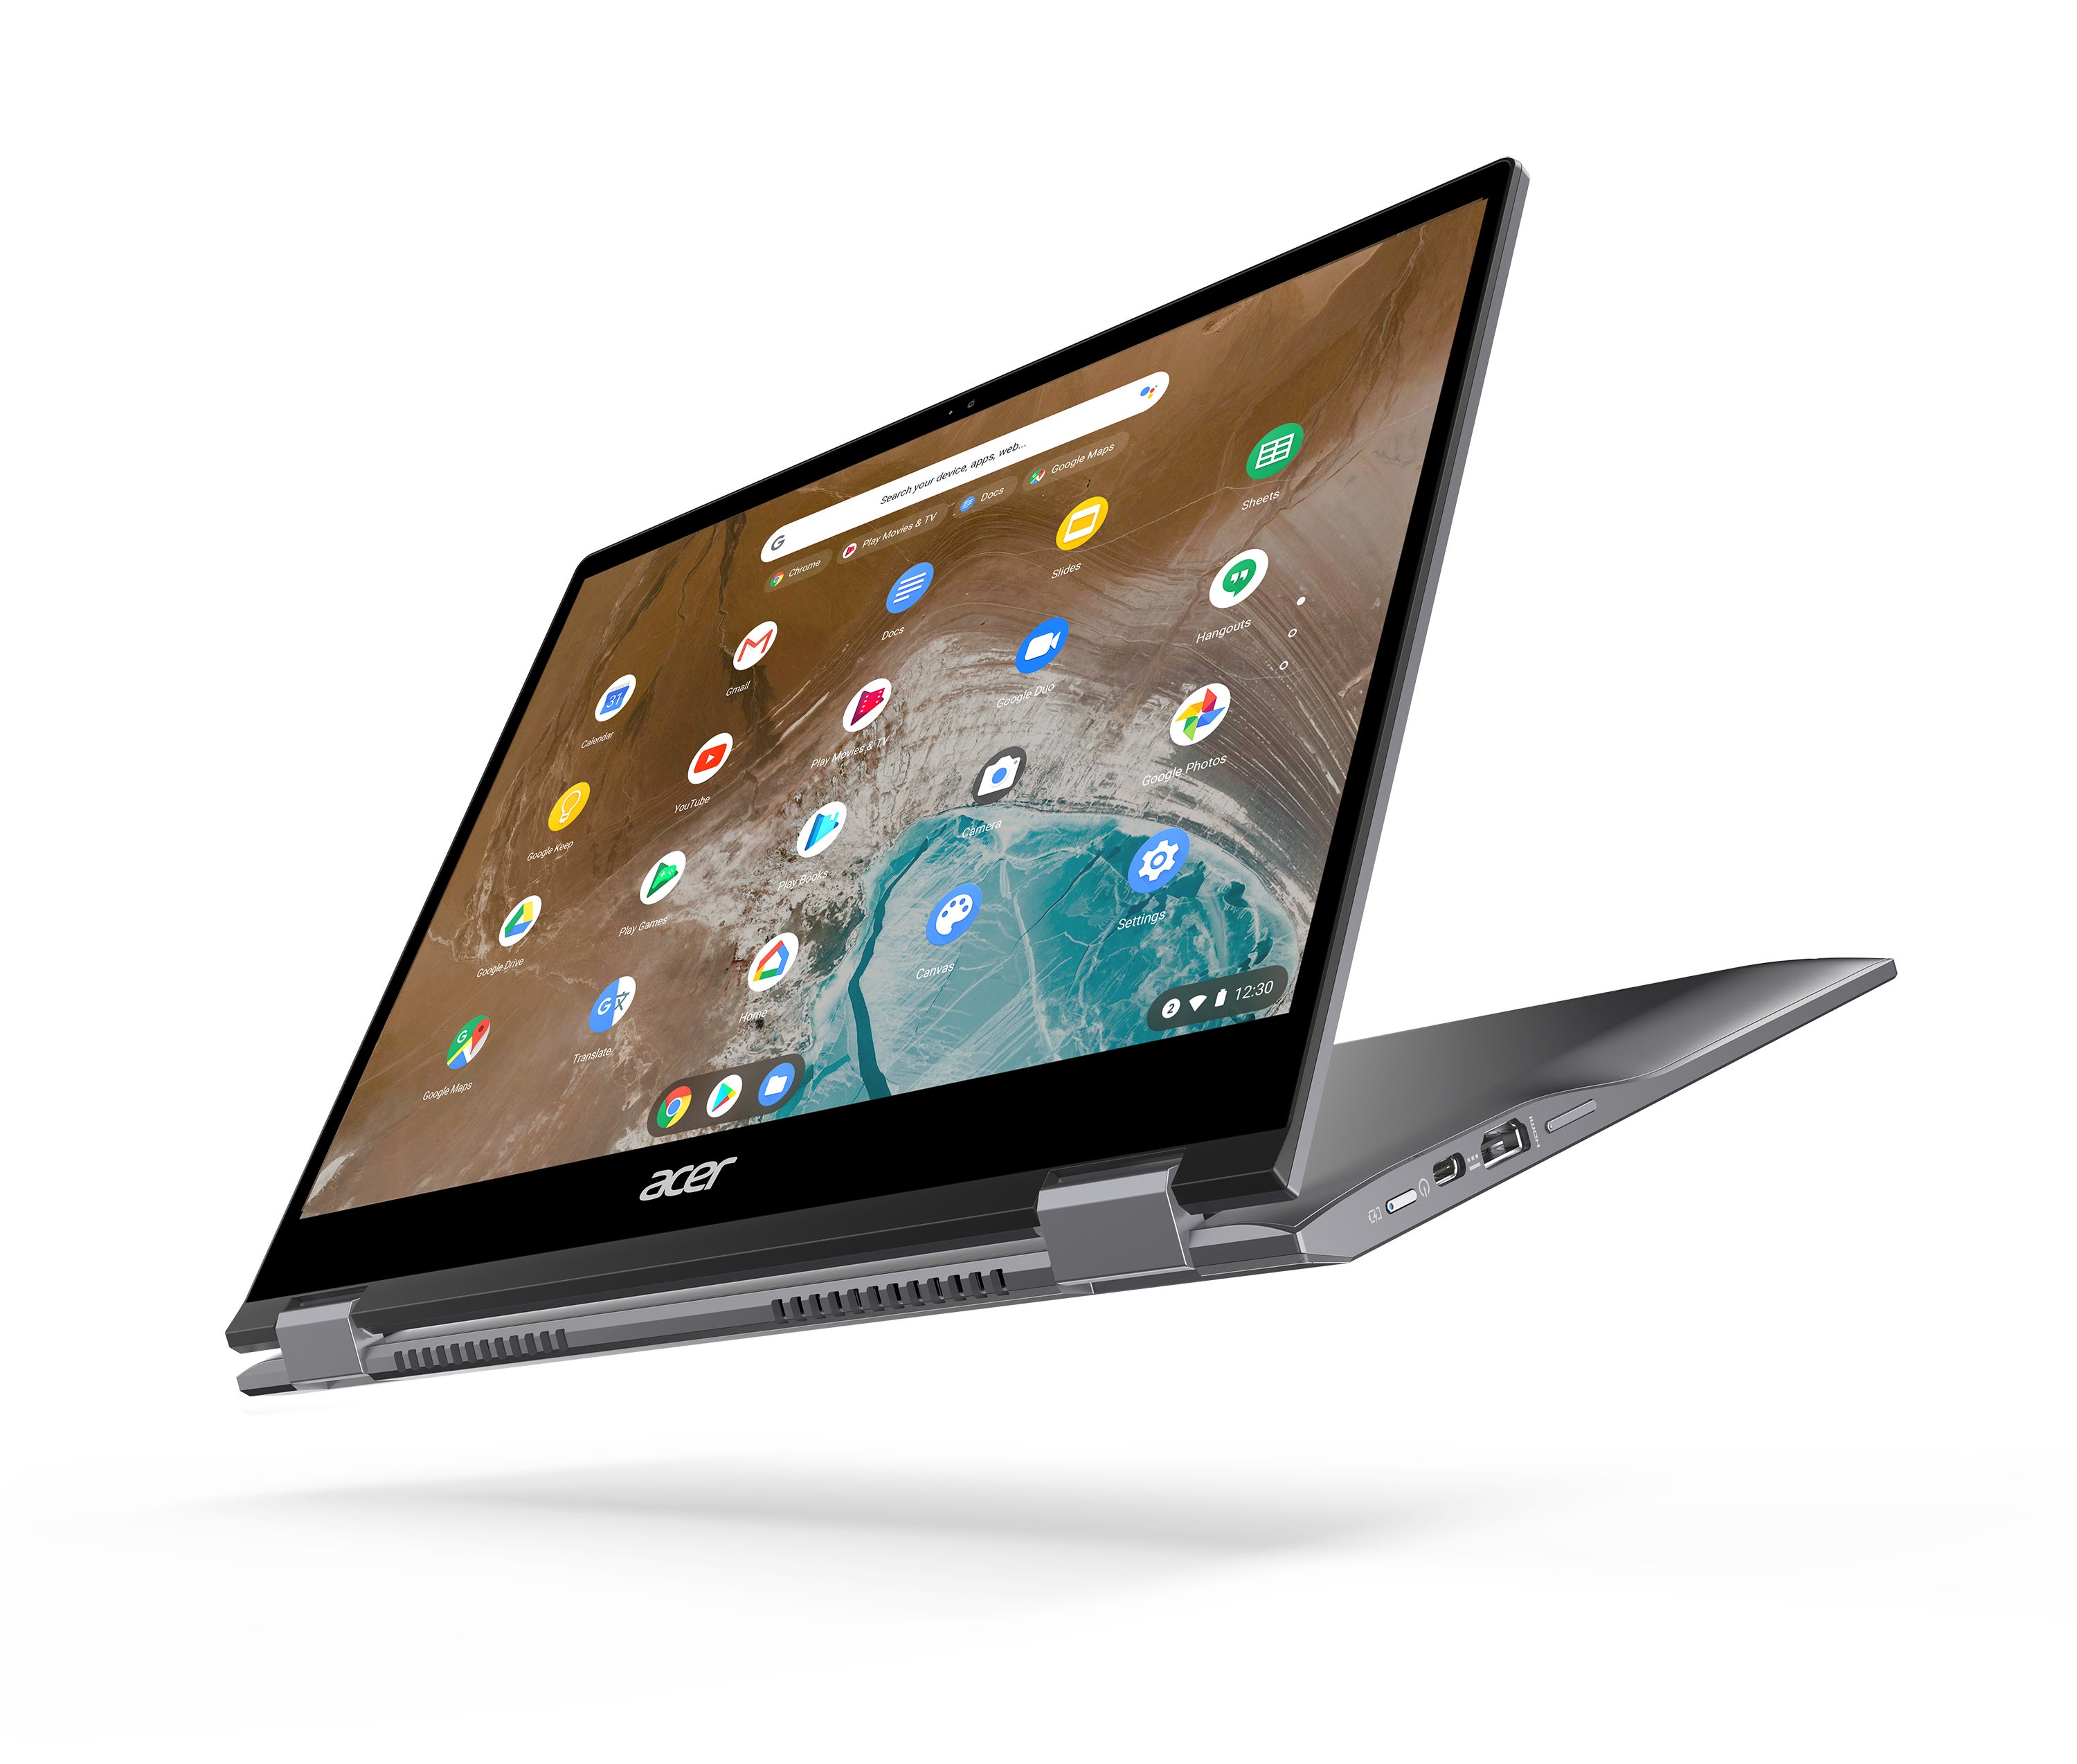 The Chromebook Spin 713 is Acer's highend model for work or home PCWorld